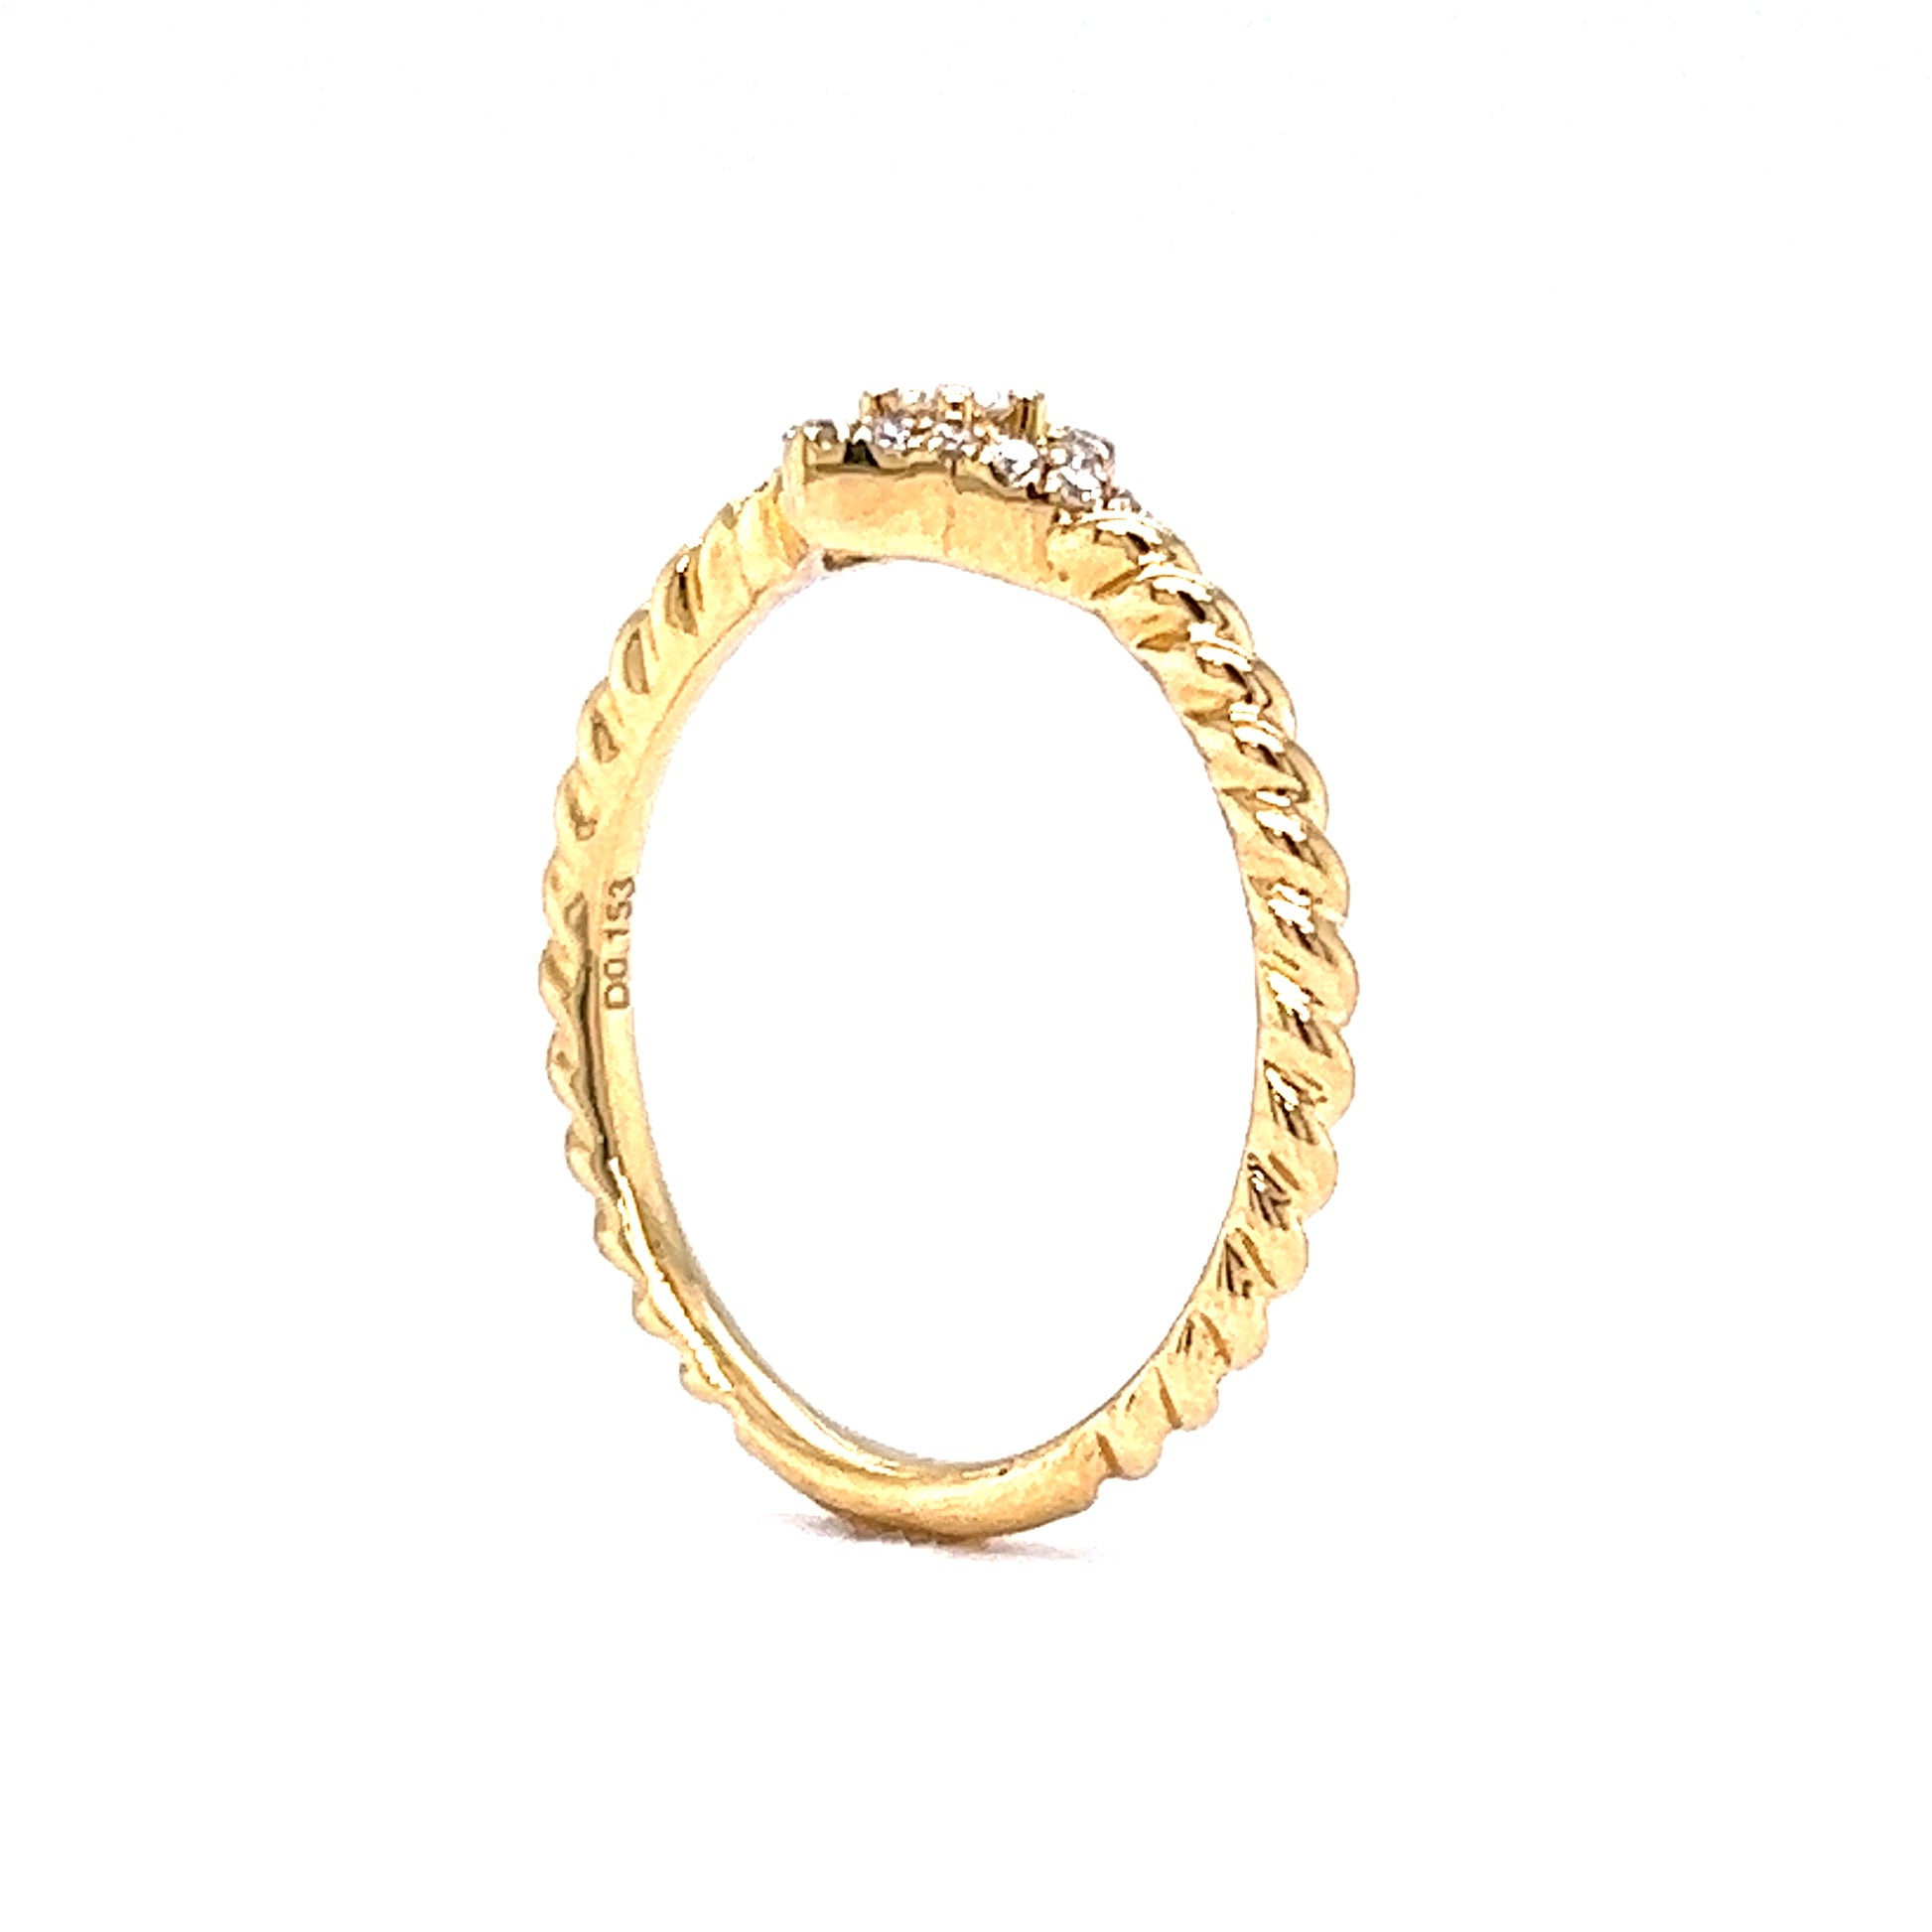 Twisted Band Pave Diamond Stacking Ring in 18k Yellow GoldComposition: 18 Karat Yellow GoldRing Size: 7Total Diamond Weight: .15 ctTotal Gram Weight: 2.6 gInscription: 18k 750 D0.153